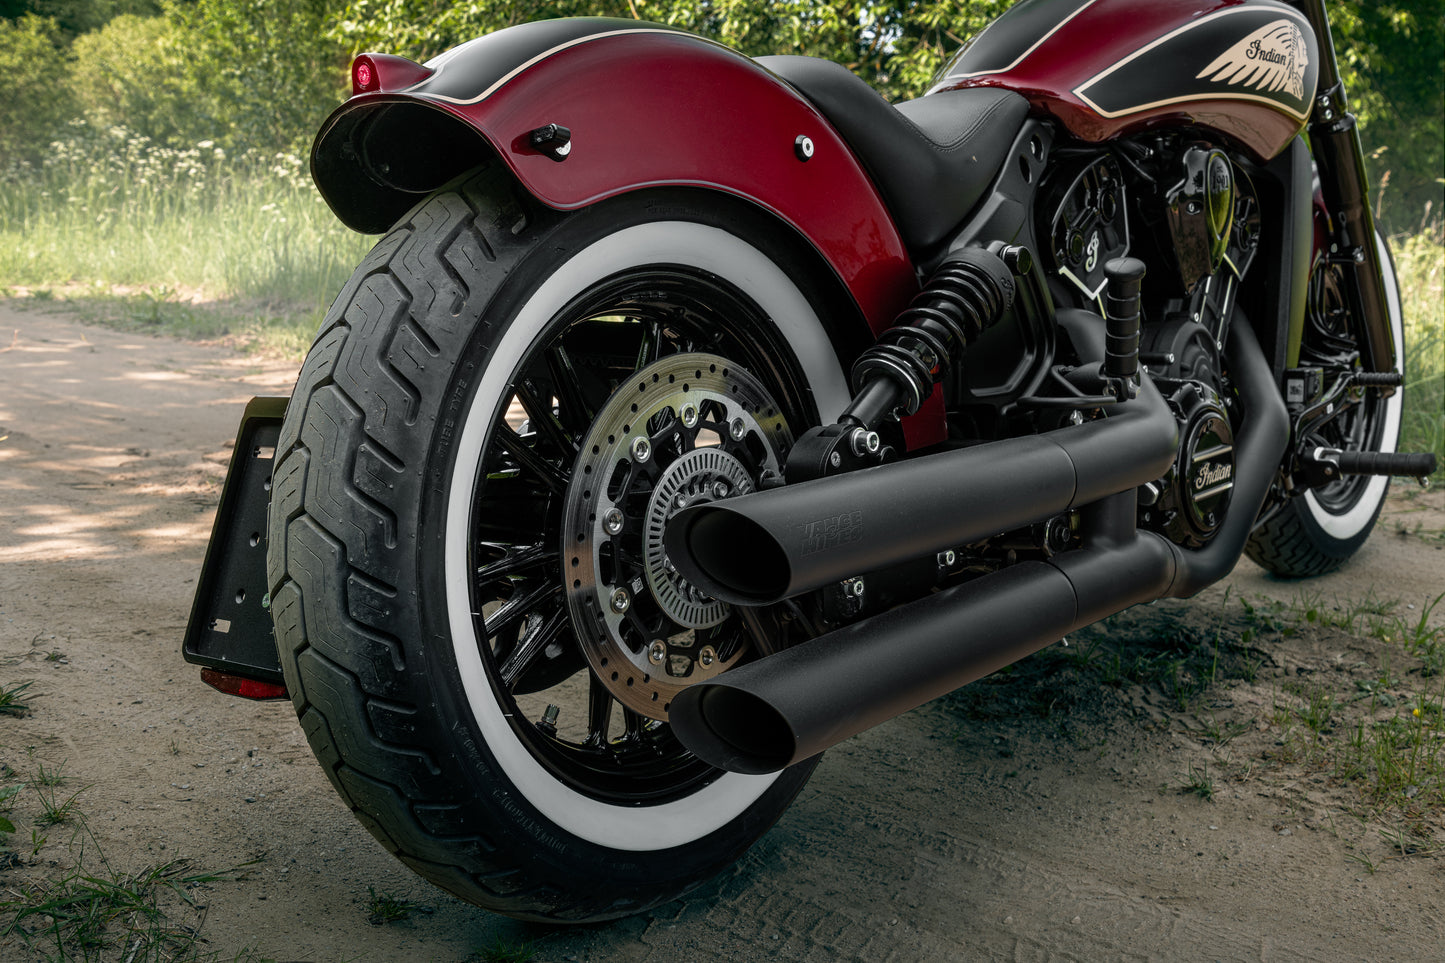 Harley Davidson motorcycle with Killer Custom "Apache" rear fender from the rear on the forest ruts